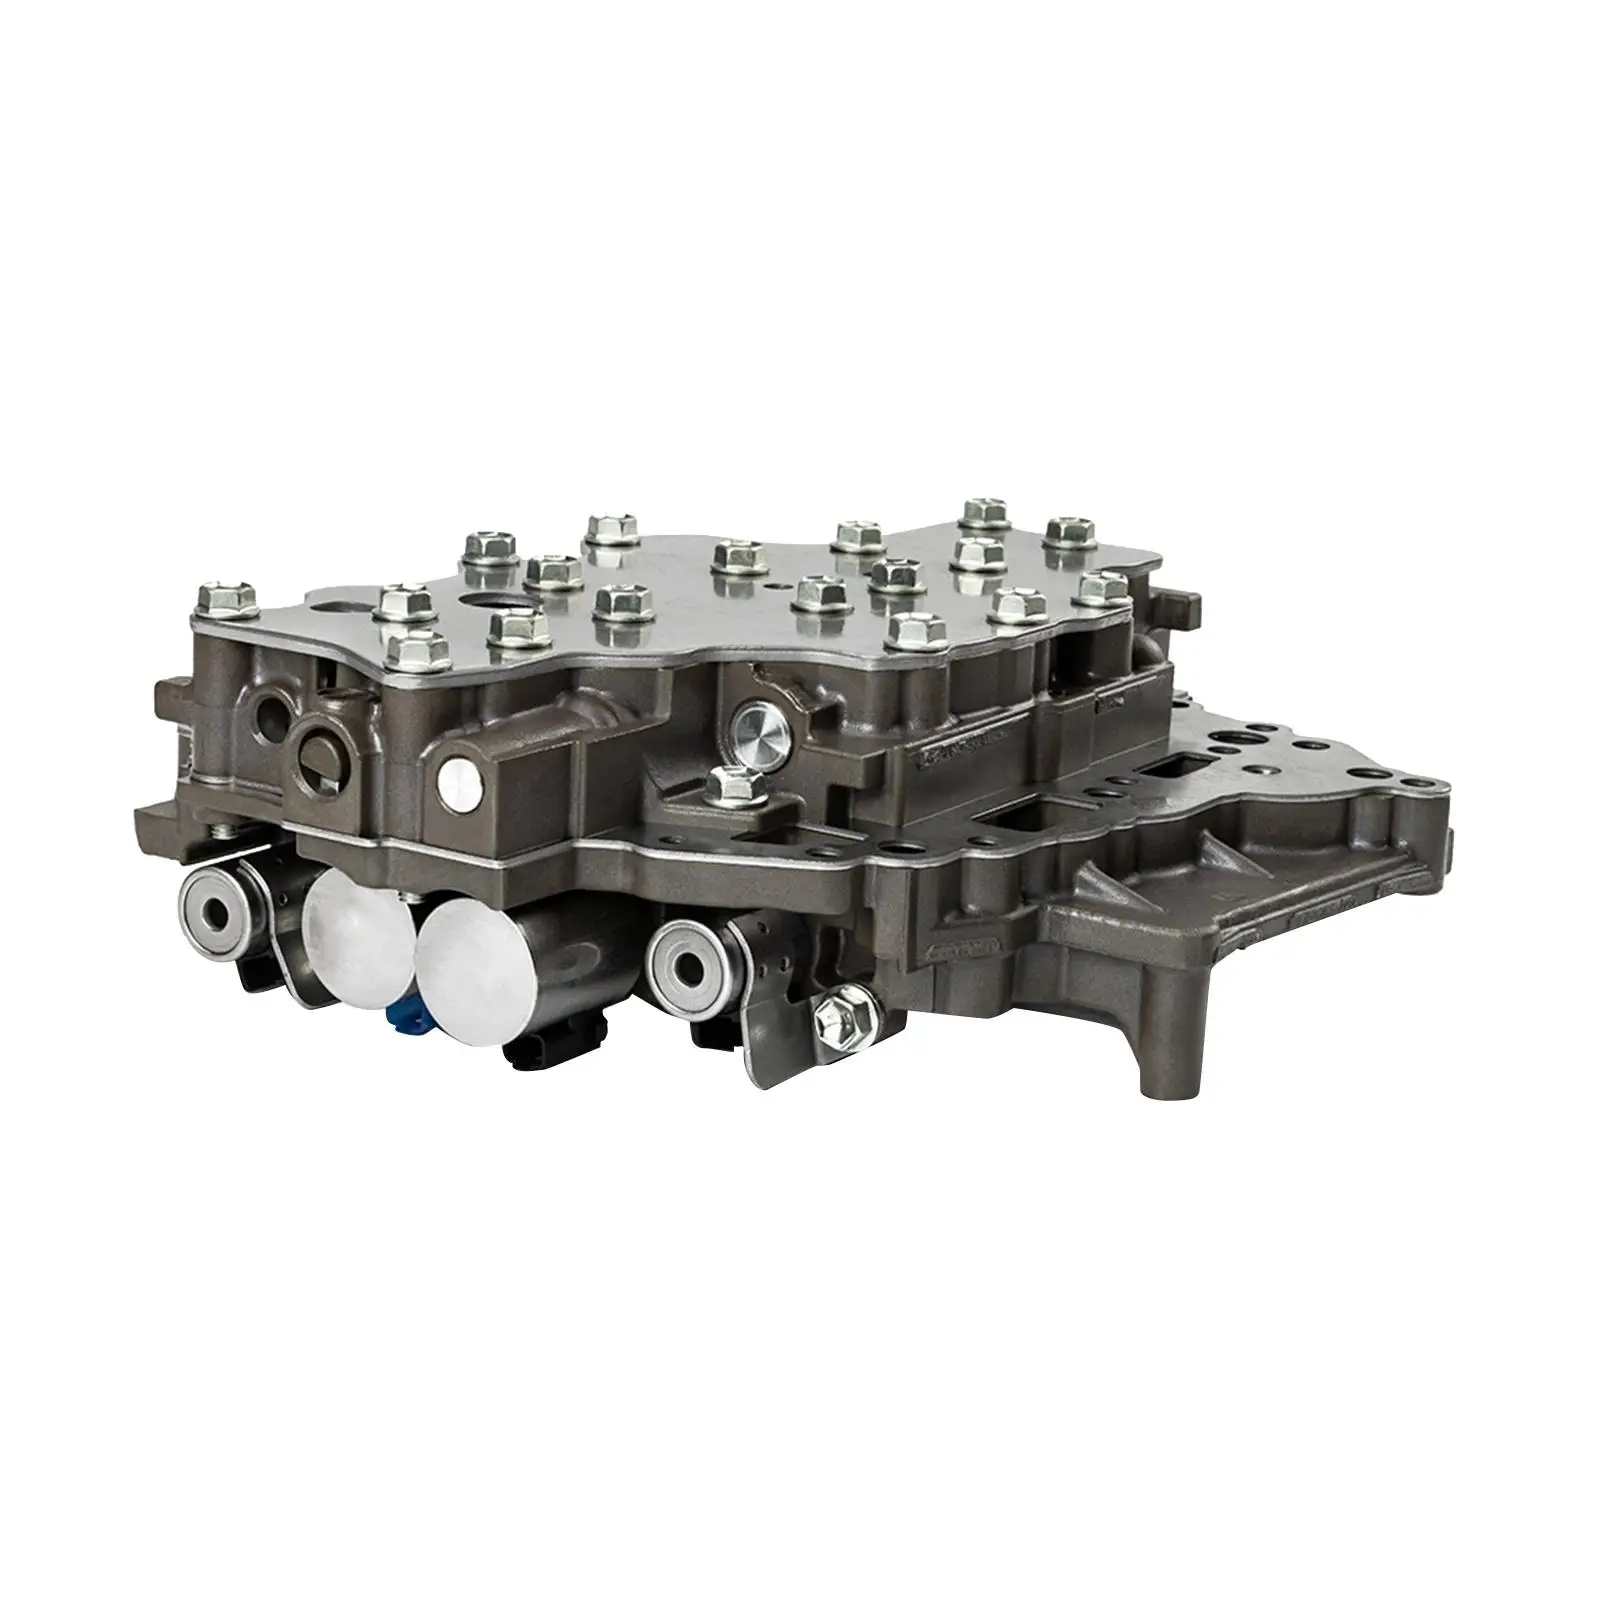 Automatic Transmission Gearbox Valve Body K310 for  Corolla1.6L 1.8L Ractis15 to - £397.60 GBP